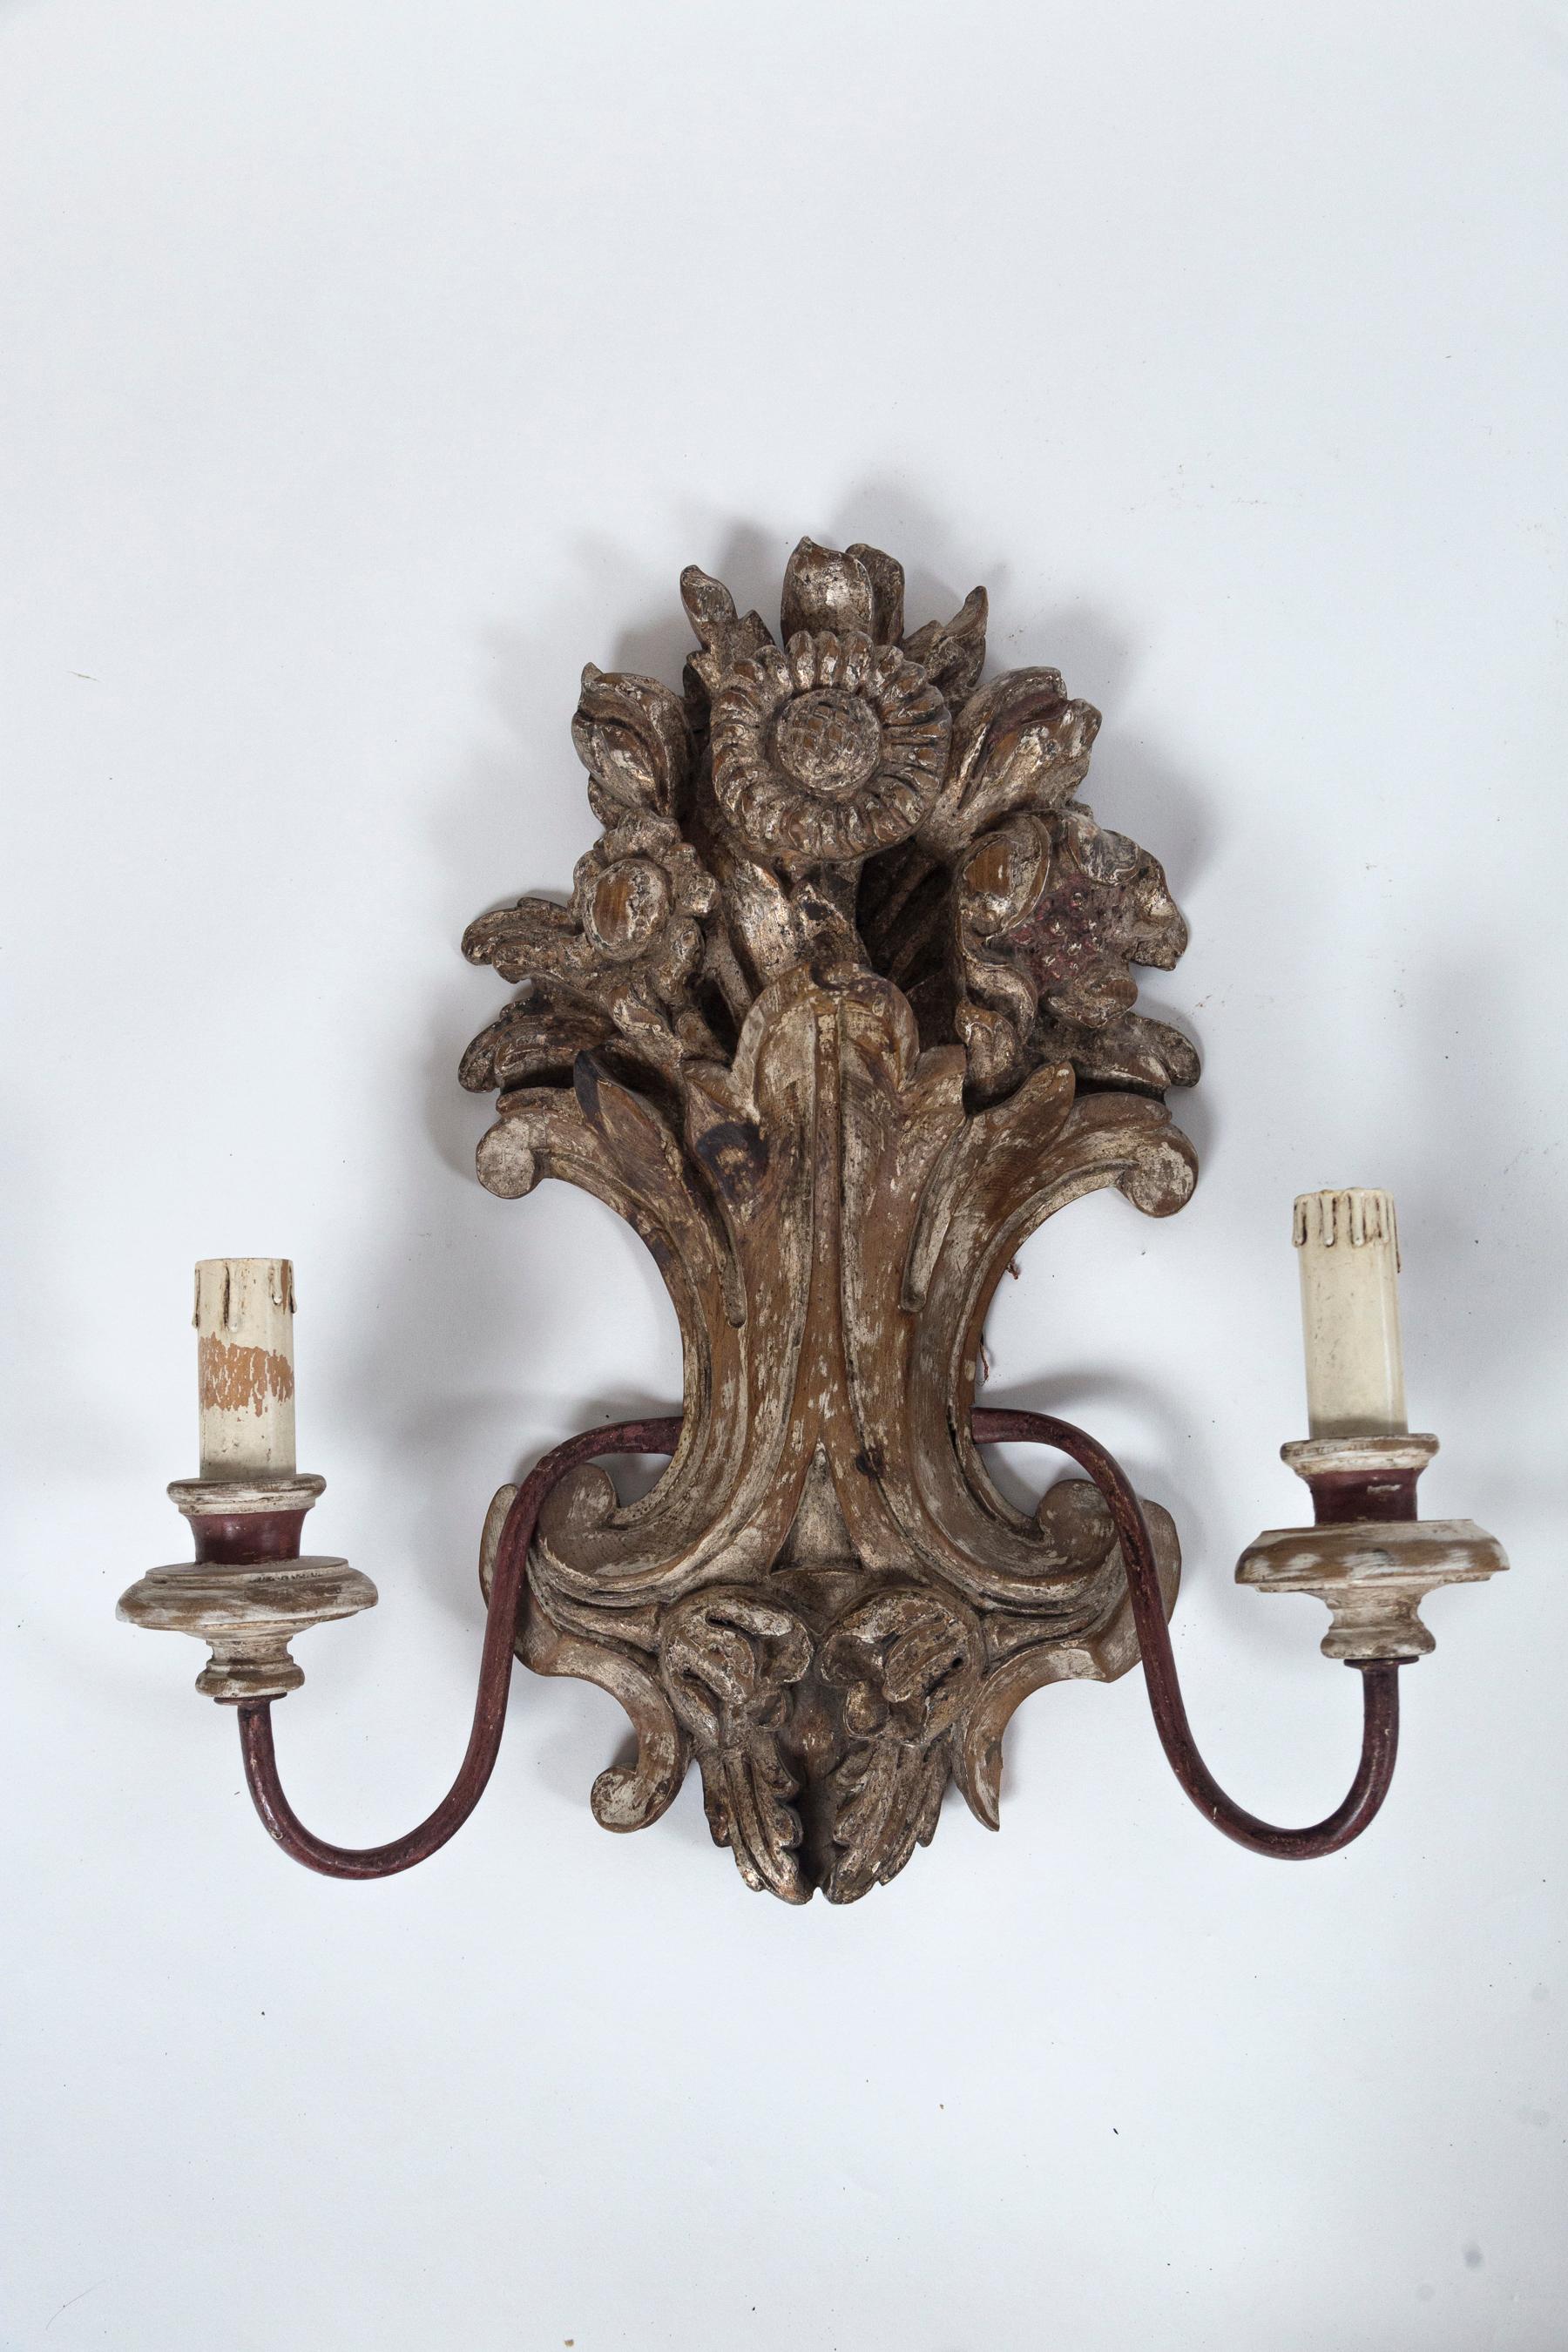 Pair of antique Italian carved wood sconces, early 20th century. Hand-carved floral motif, 2-light sconces. Lovely worn paint finish.